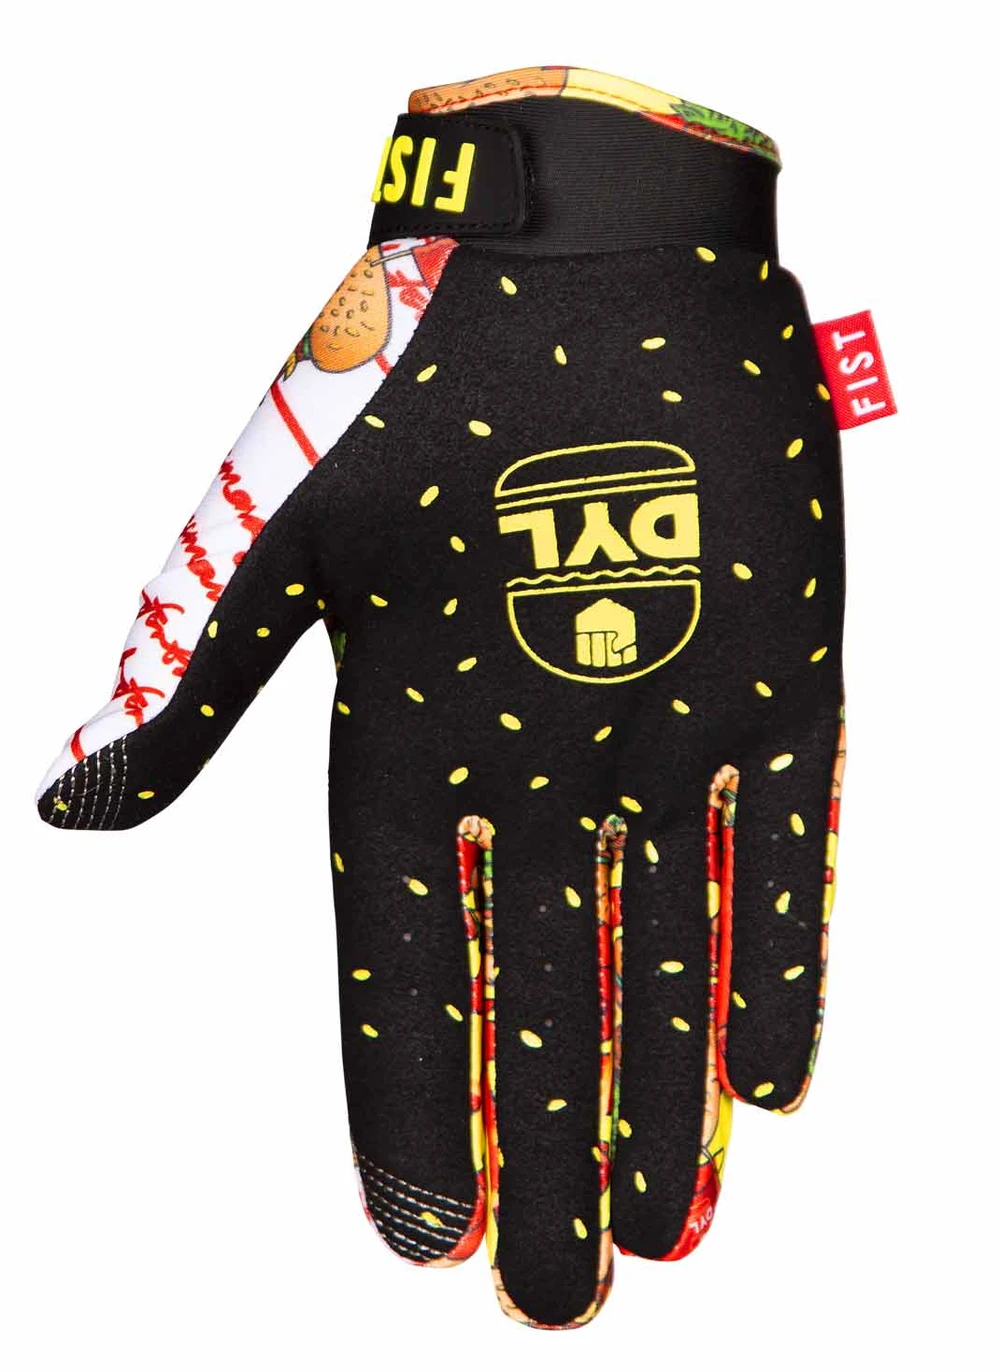 FIST GLOVES "BURGERS" YOUTH  L